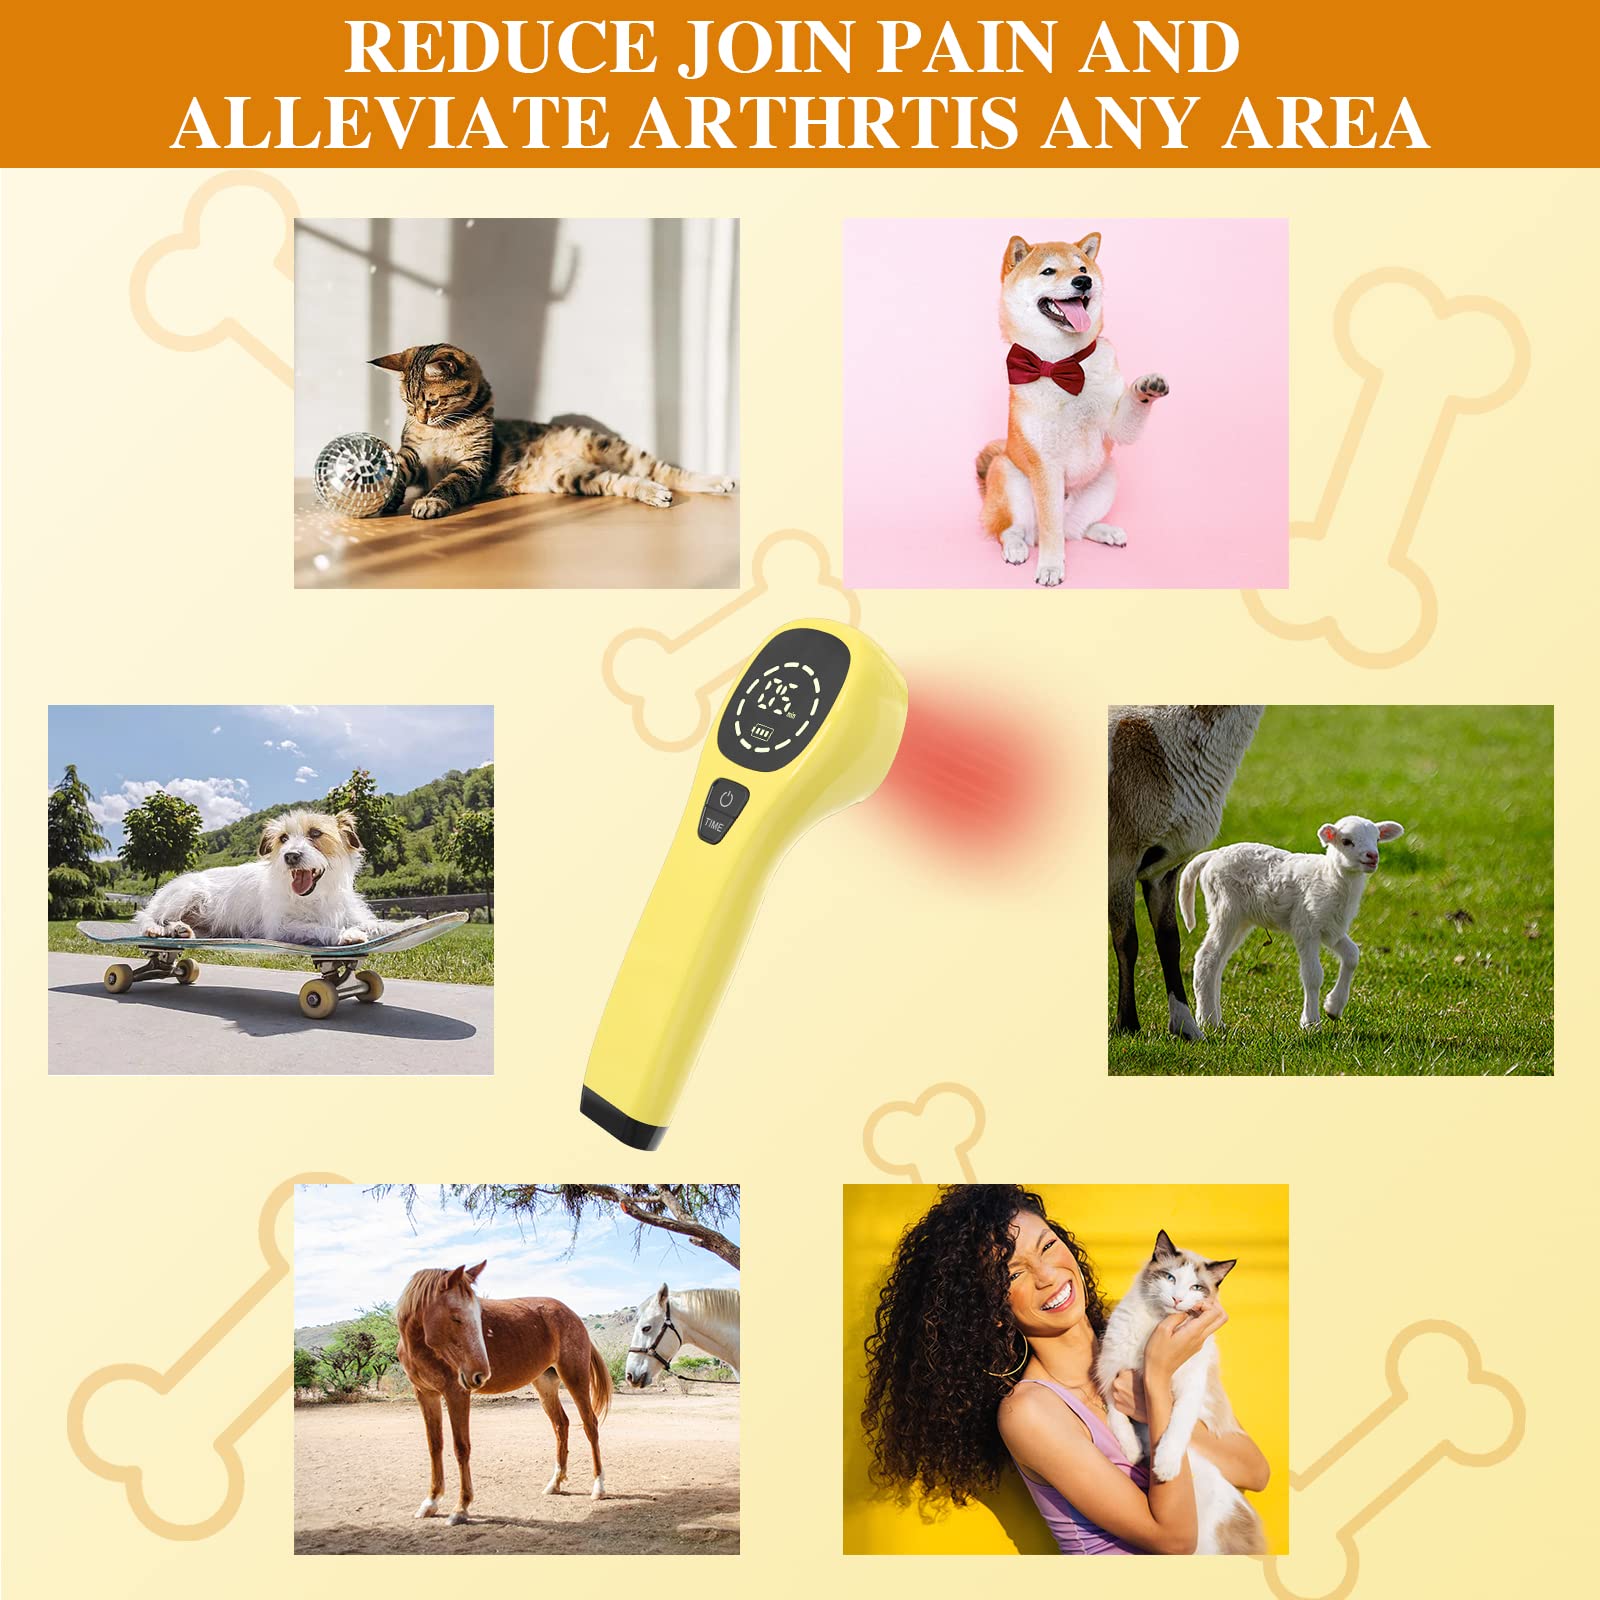 KTS® Pet Handheld Cold Laser Therapy Device